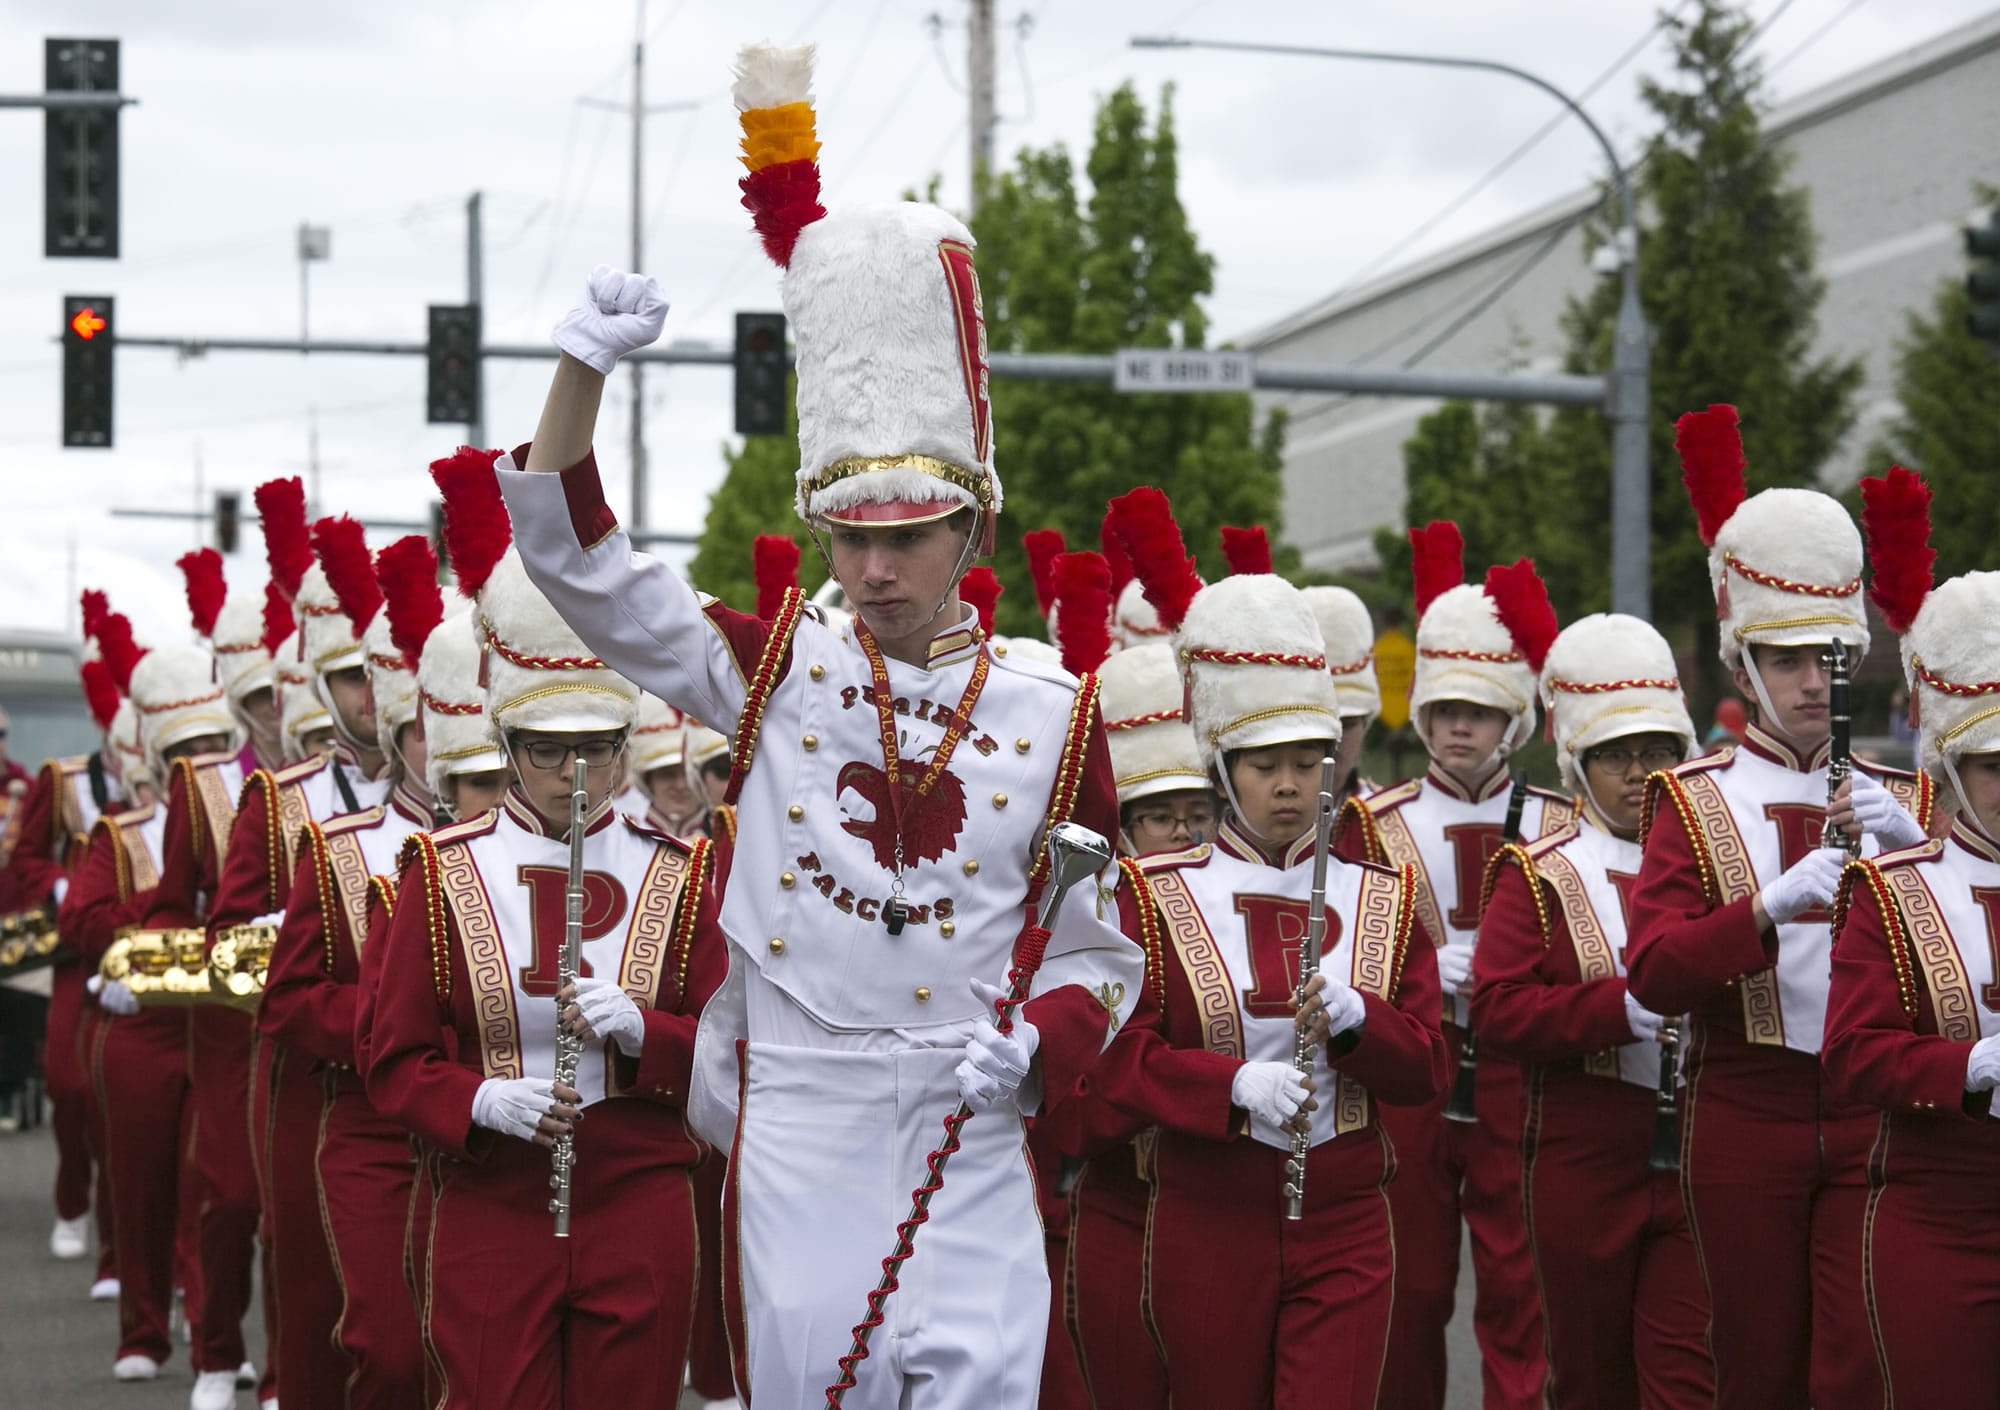 The Prairie High School marching band marches in the annual Hazel Dell parade Saturday.